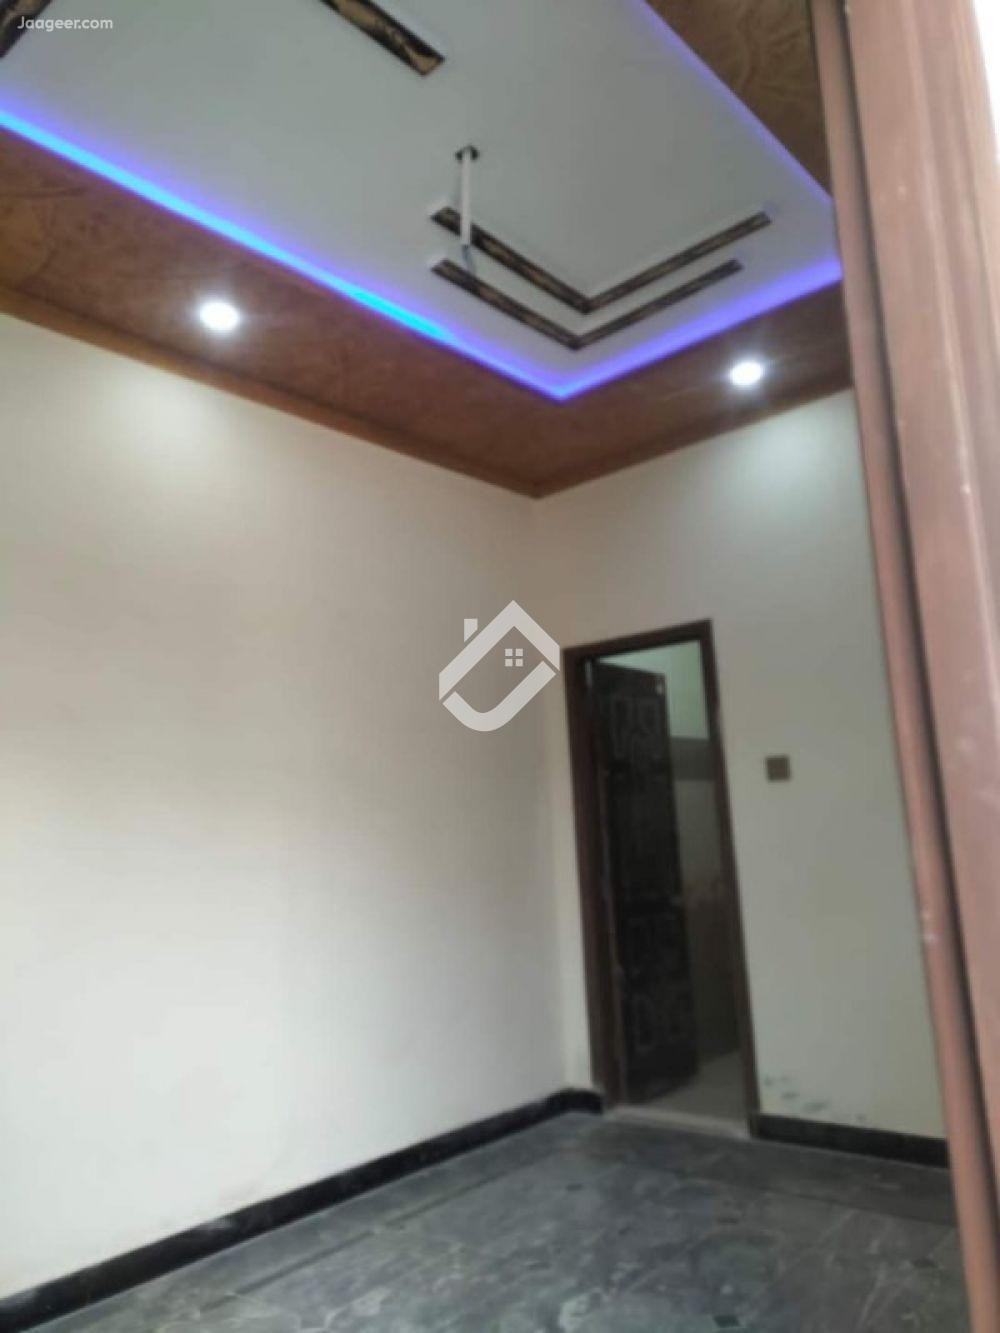 View  3 Marla Double Storey House For Sale At Lehtrar Road in Lehtrar Road, Islamabad